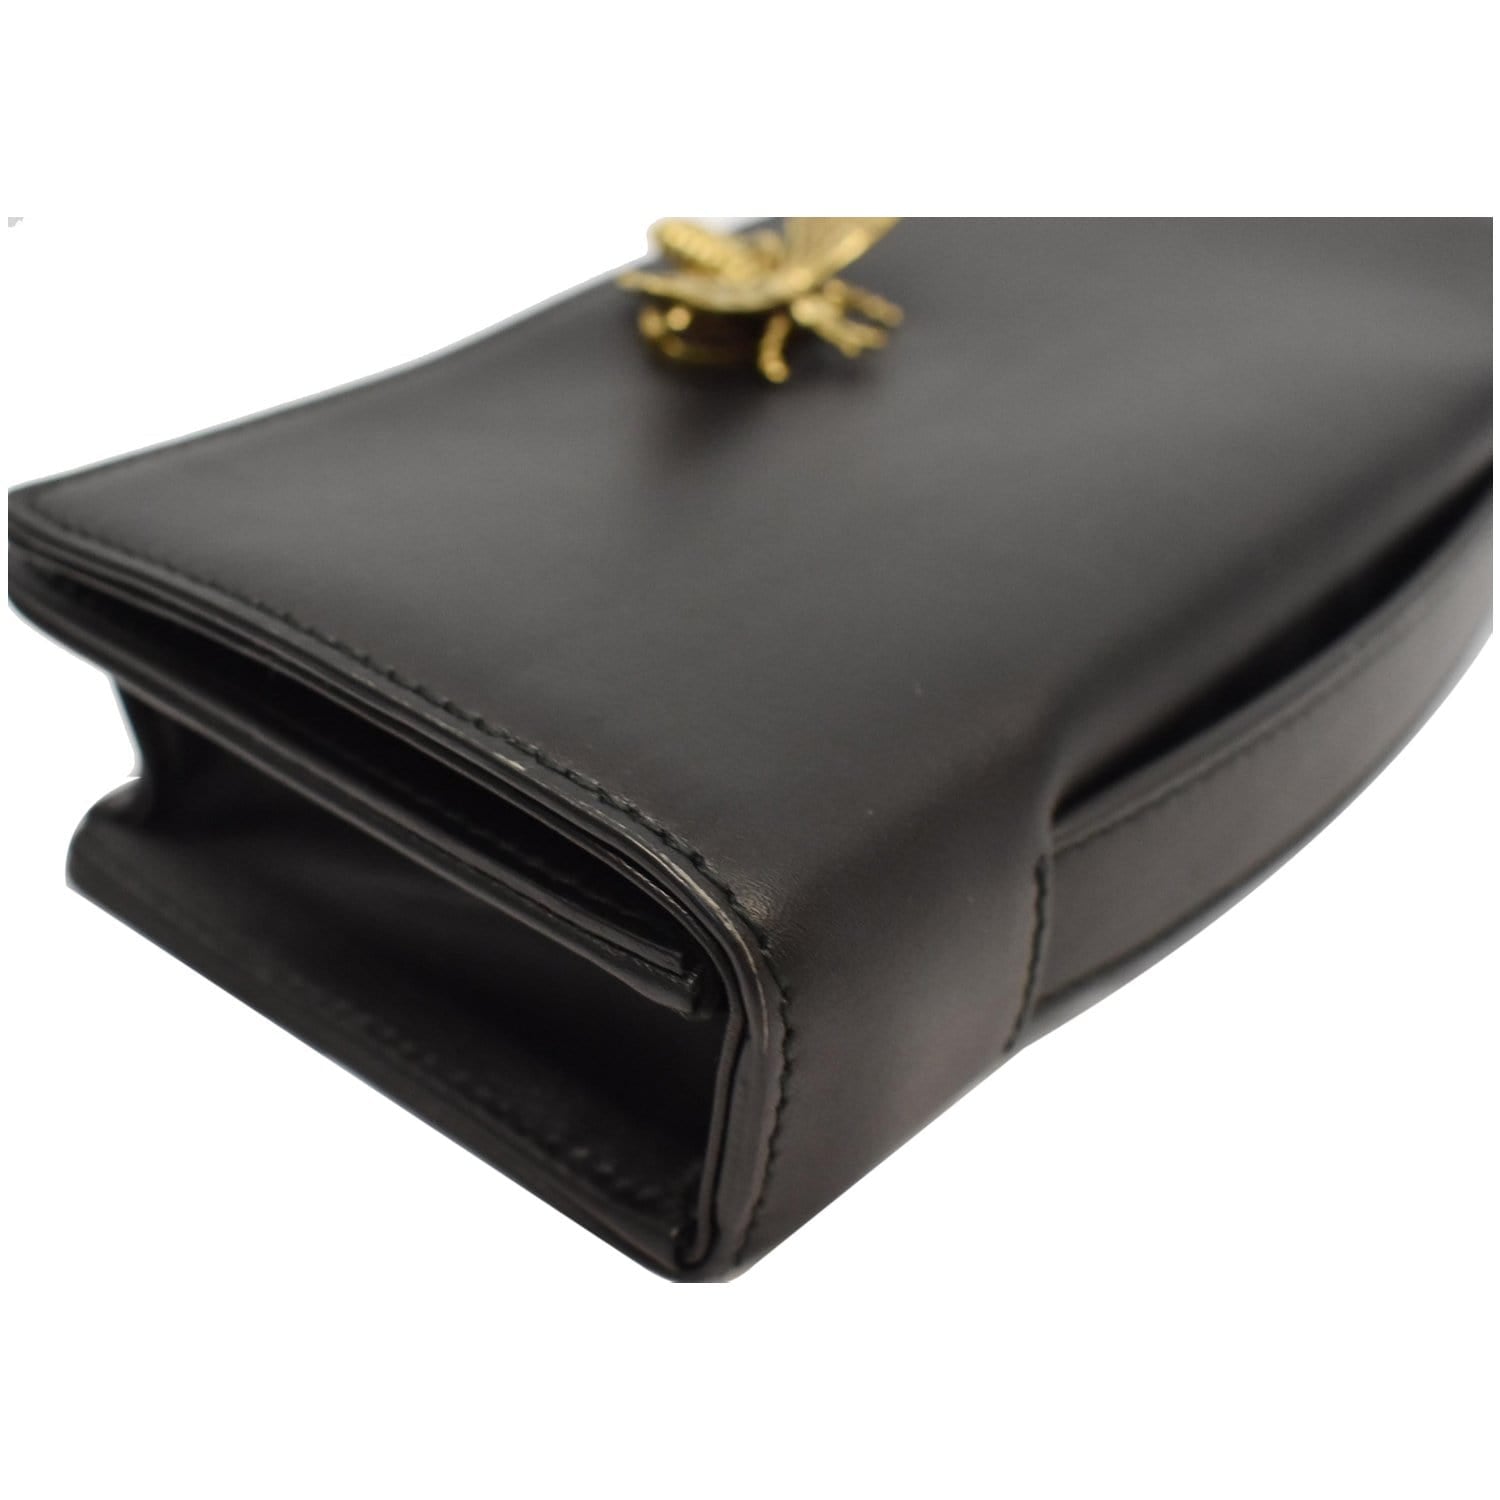 Leather clutch bag Christian Dior Black in Leather - 31024121